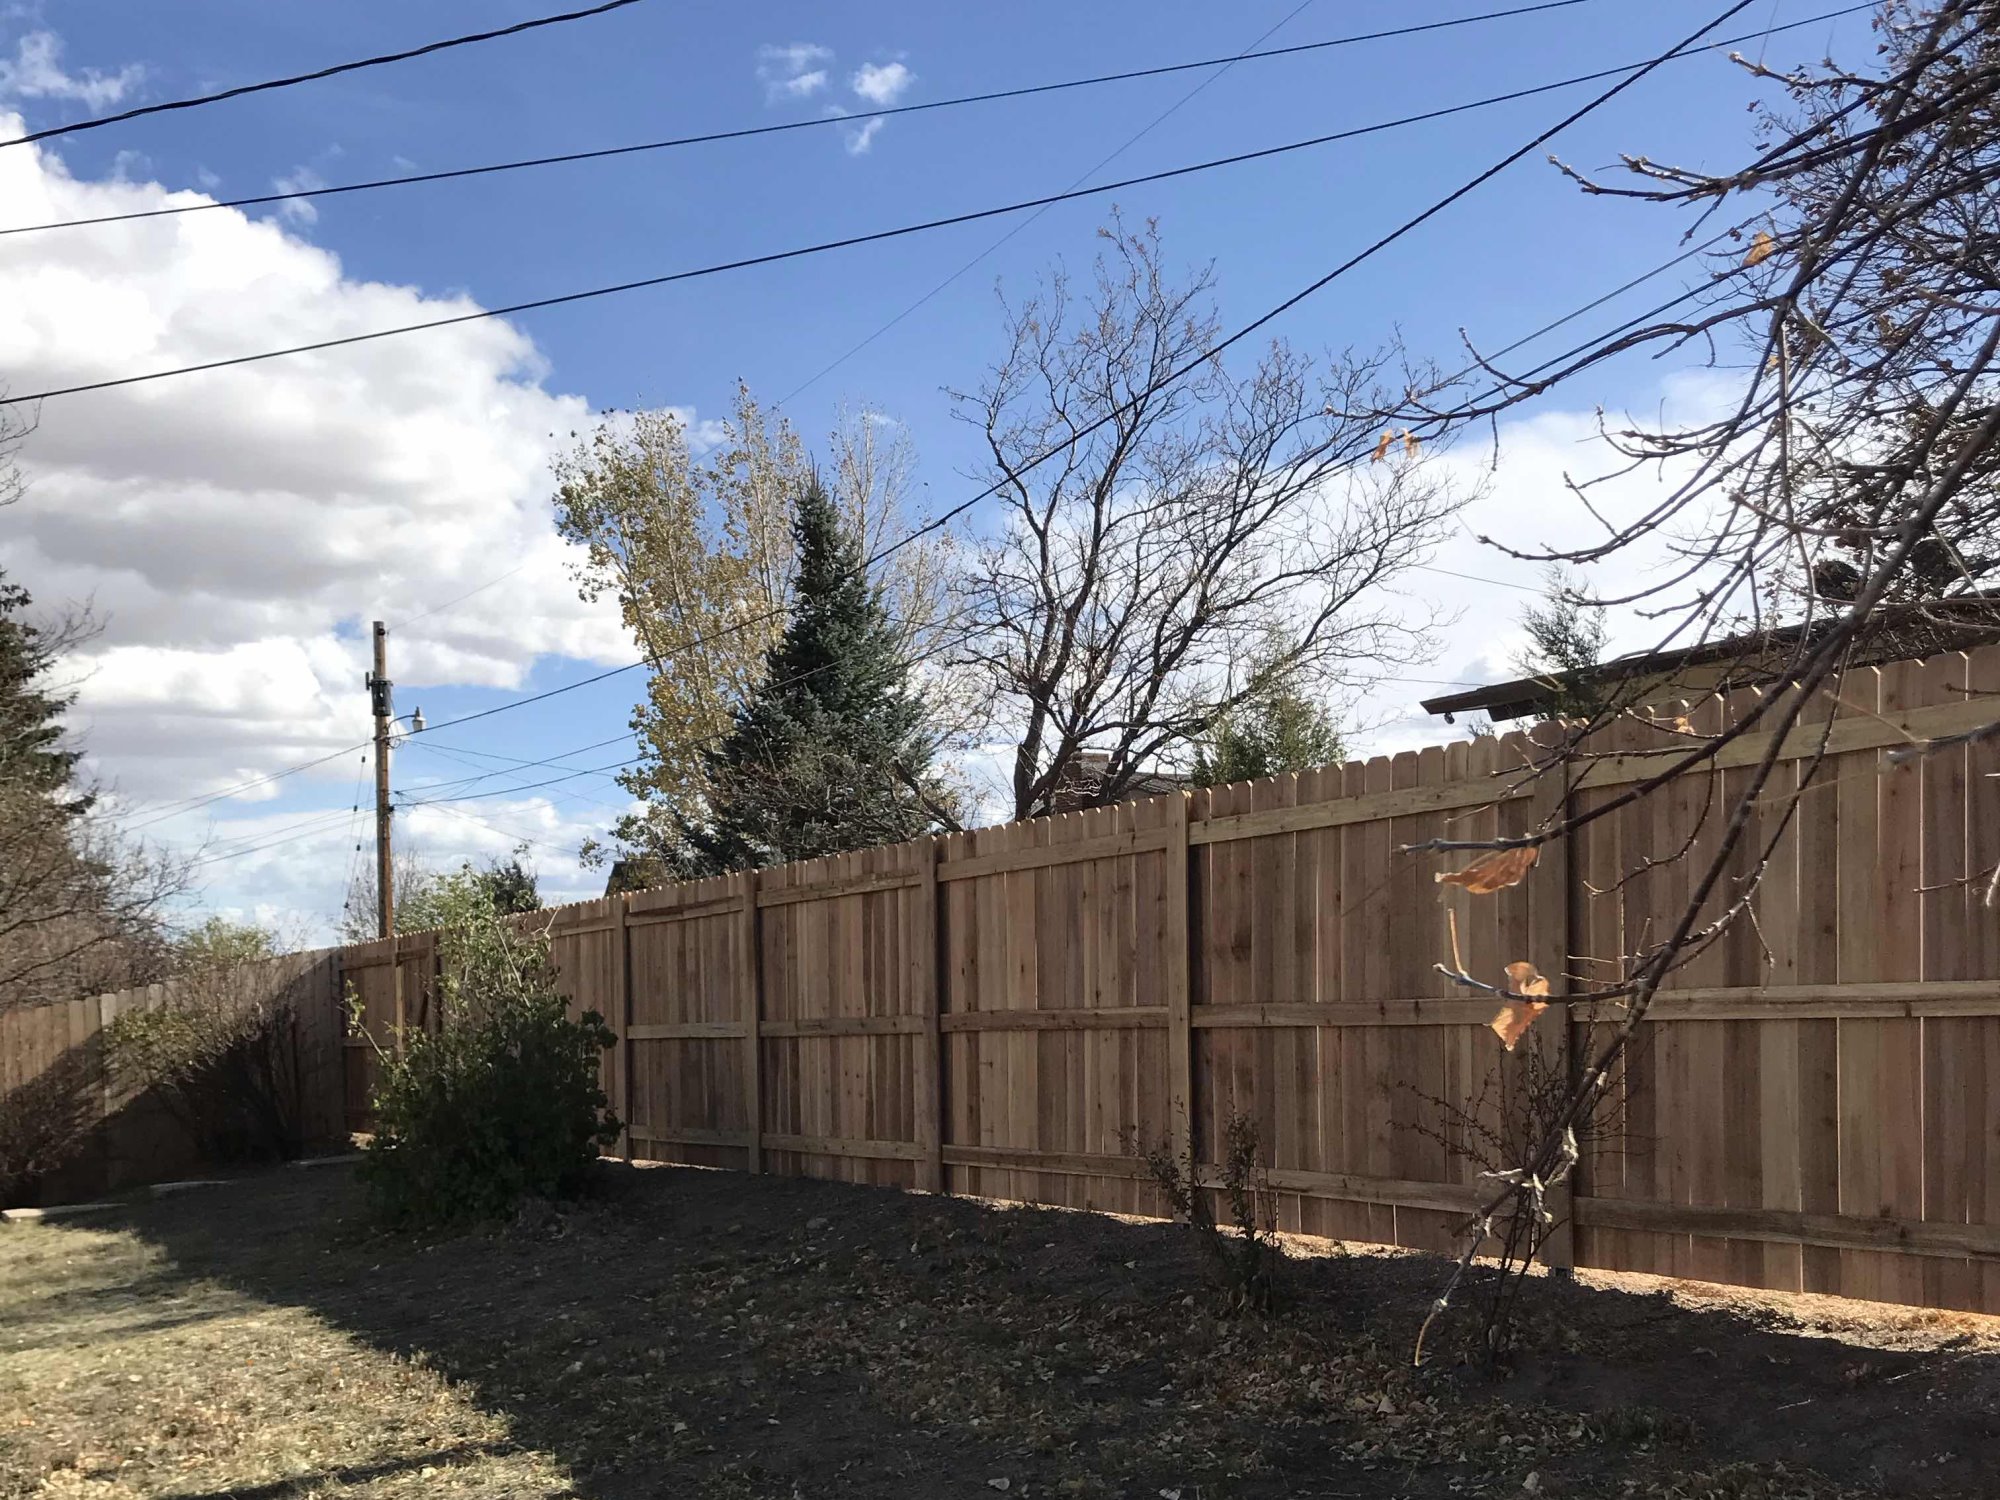 Wyoming Residential Cedar Fence Project